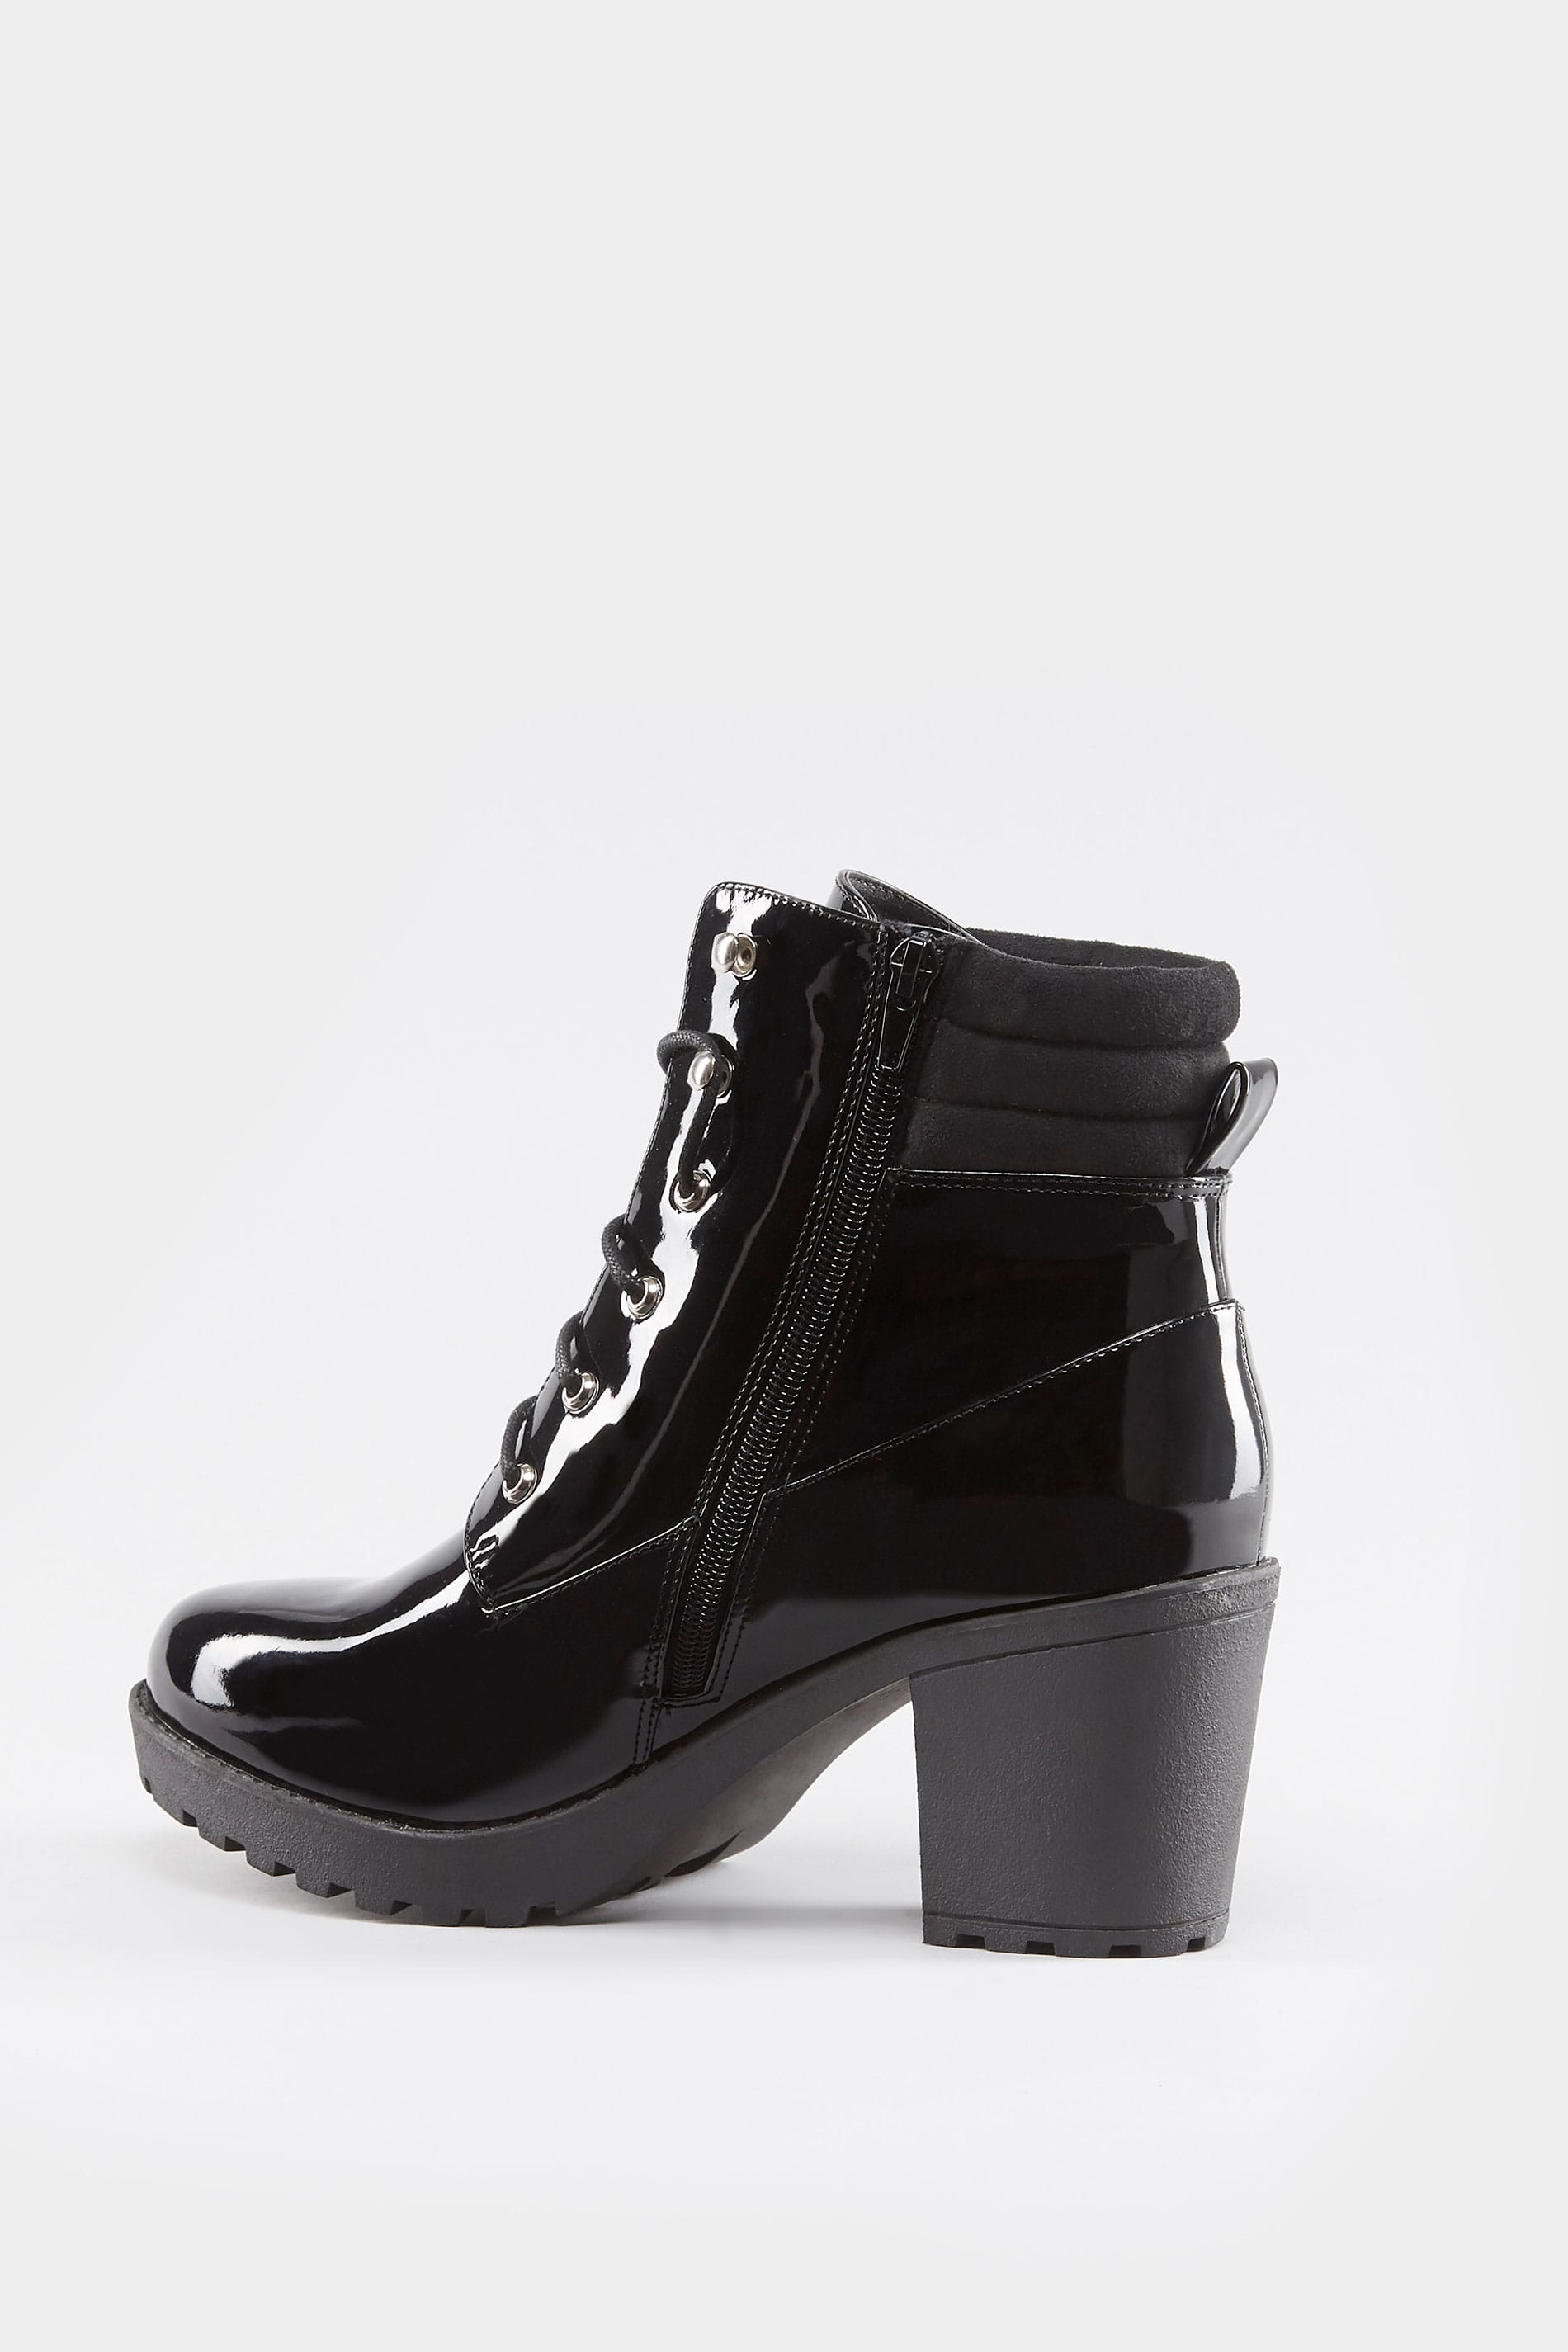 Black Patent Lace Up Heeled Ankle Boot In EEE Fit, Wide Fitting Sizes ...